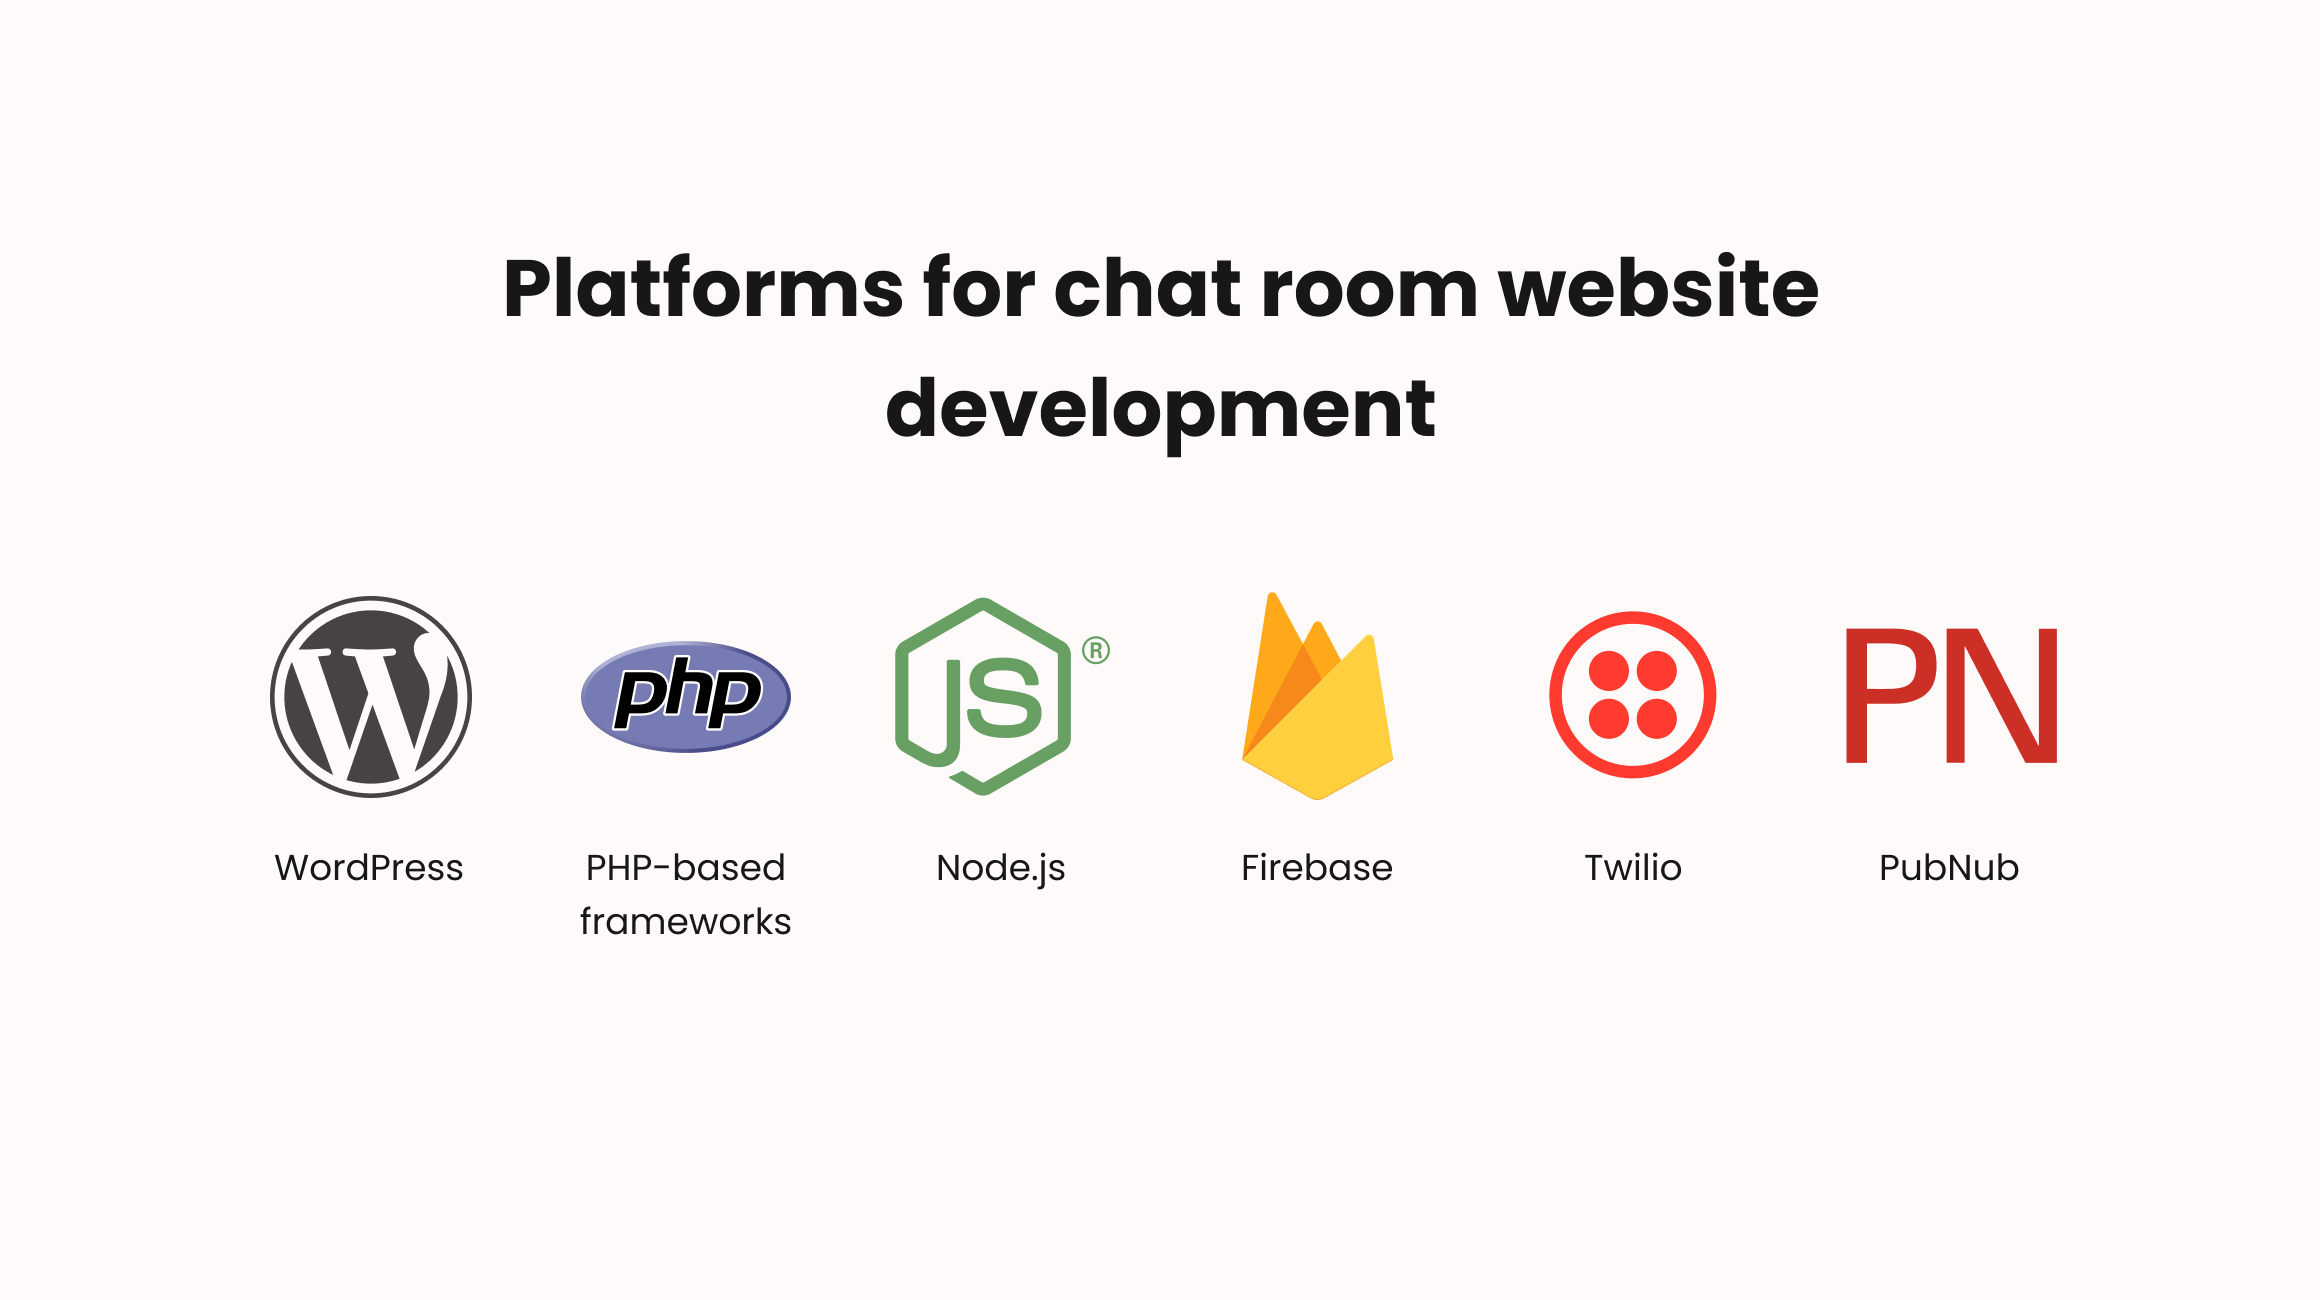 Platforms available for building a chat room